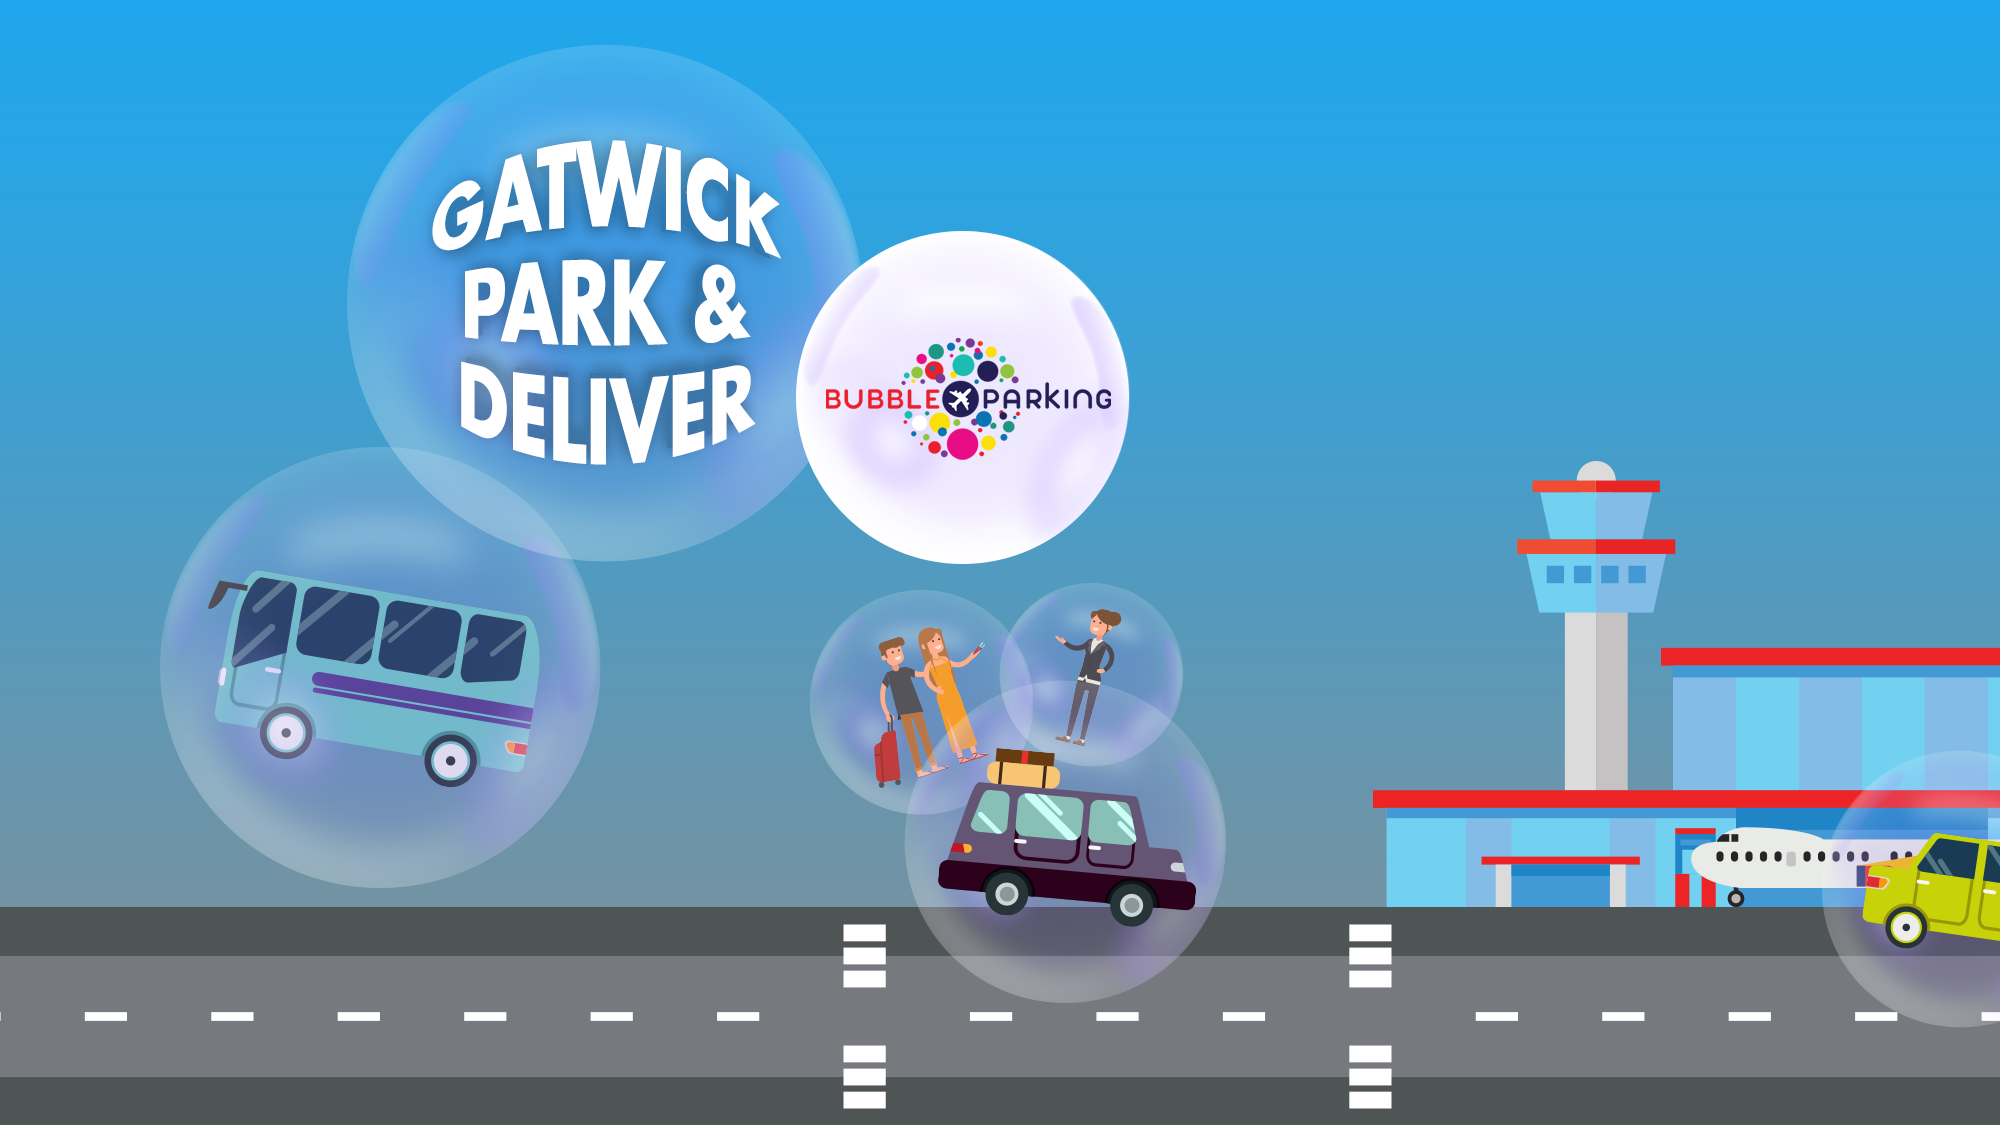 Park and Deliver Gatwick